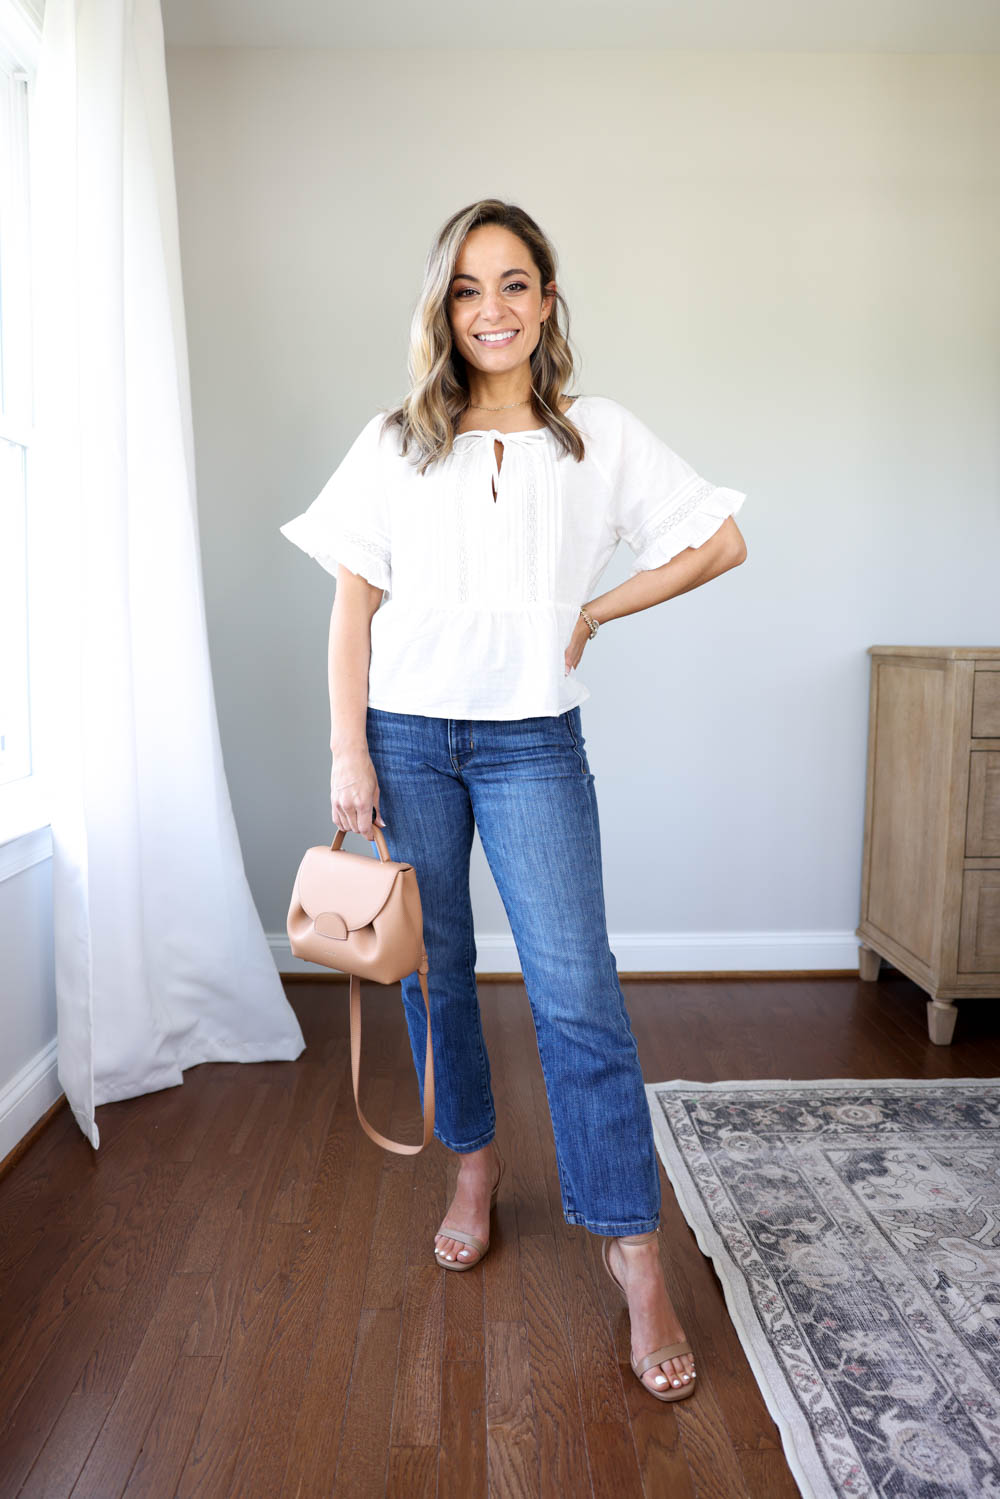 Petite-friendly spring outfits via pumps and push-ups blog | spring outfits | petite style | petite fashion | white top outfits 